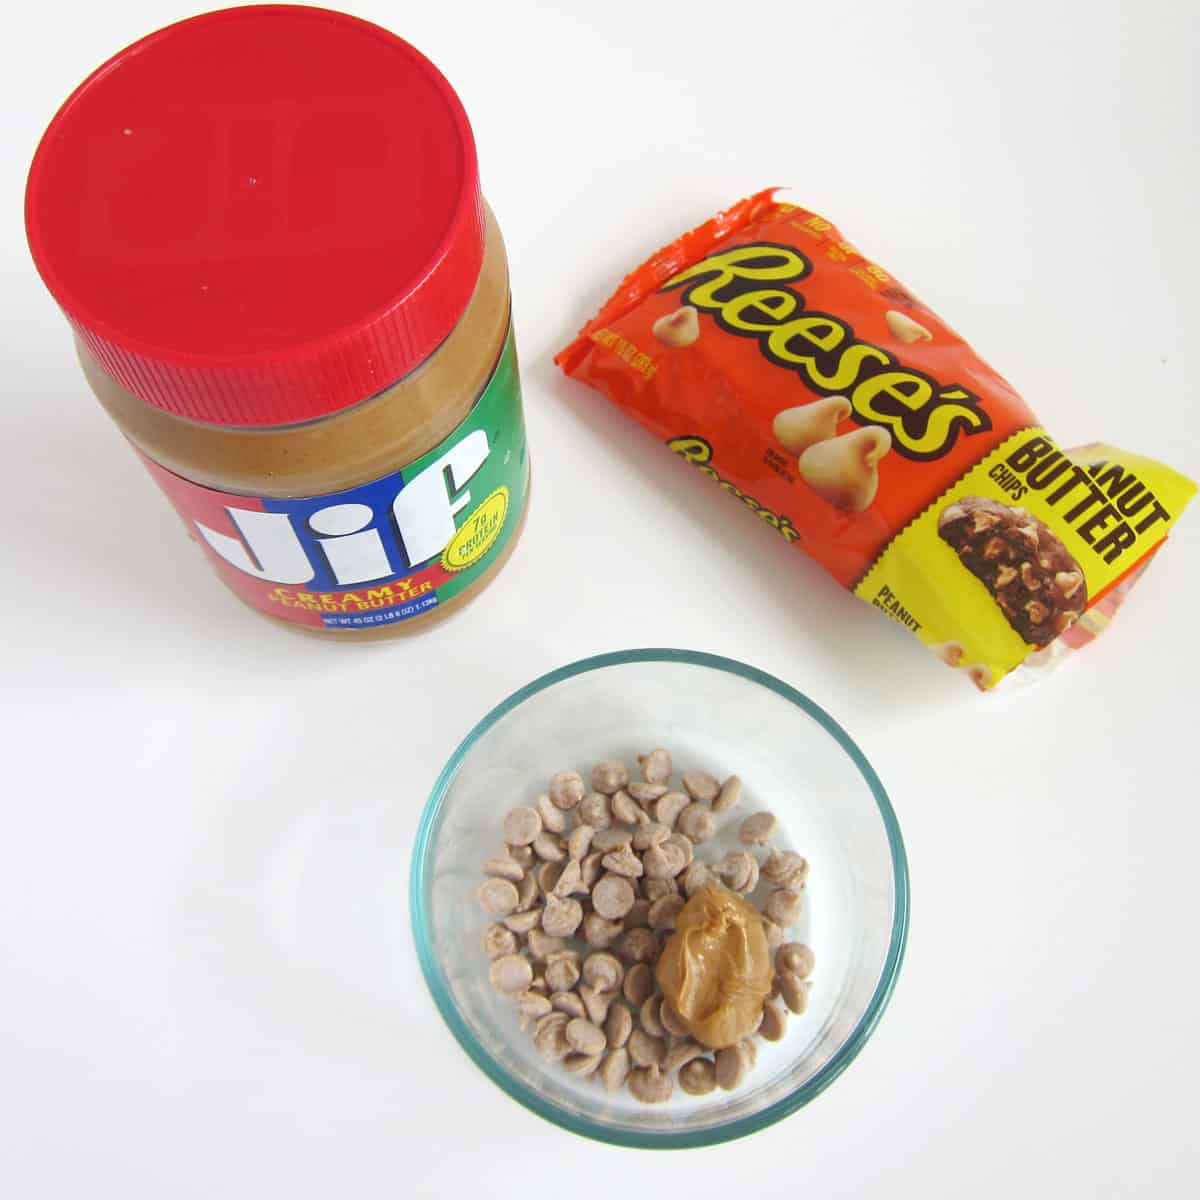 Reese's Peanut butter Chips and creamy peanut butter.